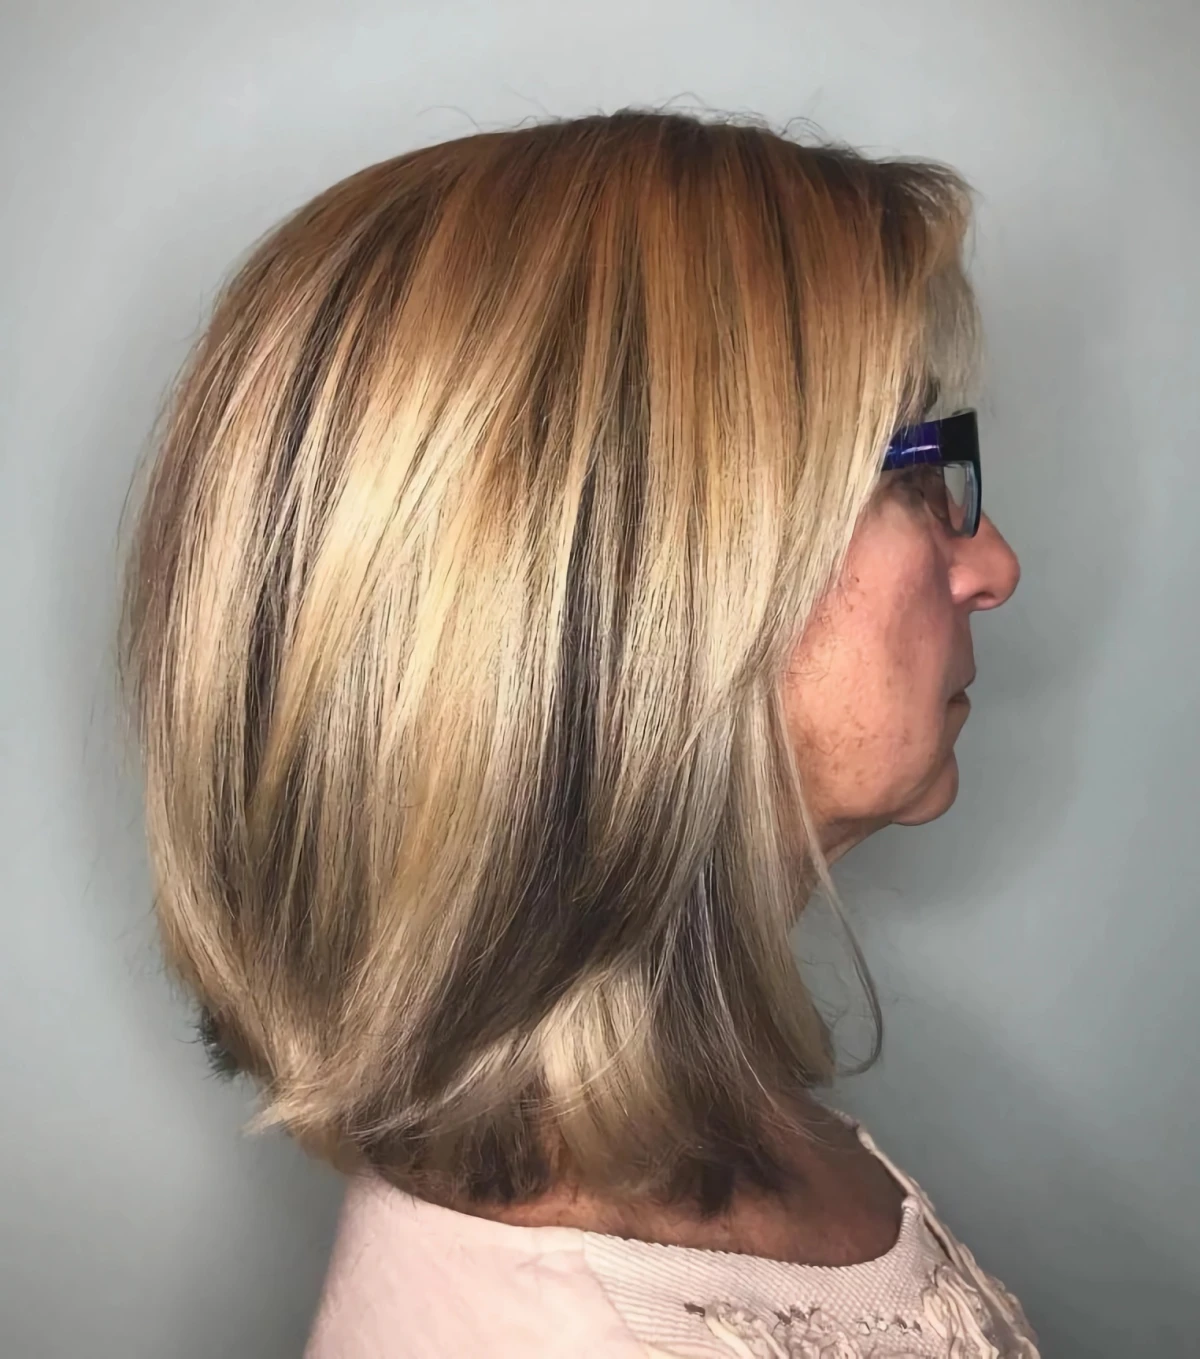 1681540646 995 A layered bob for older women combines comfort and elegance.webp - A layered bob for older women combines comfort and elegance and magics away 10 years in no time!